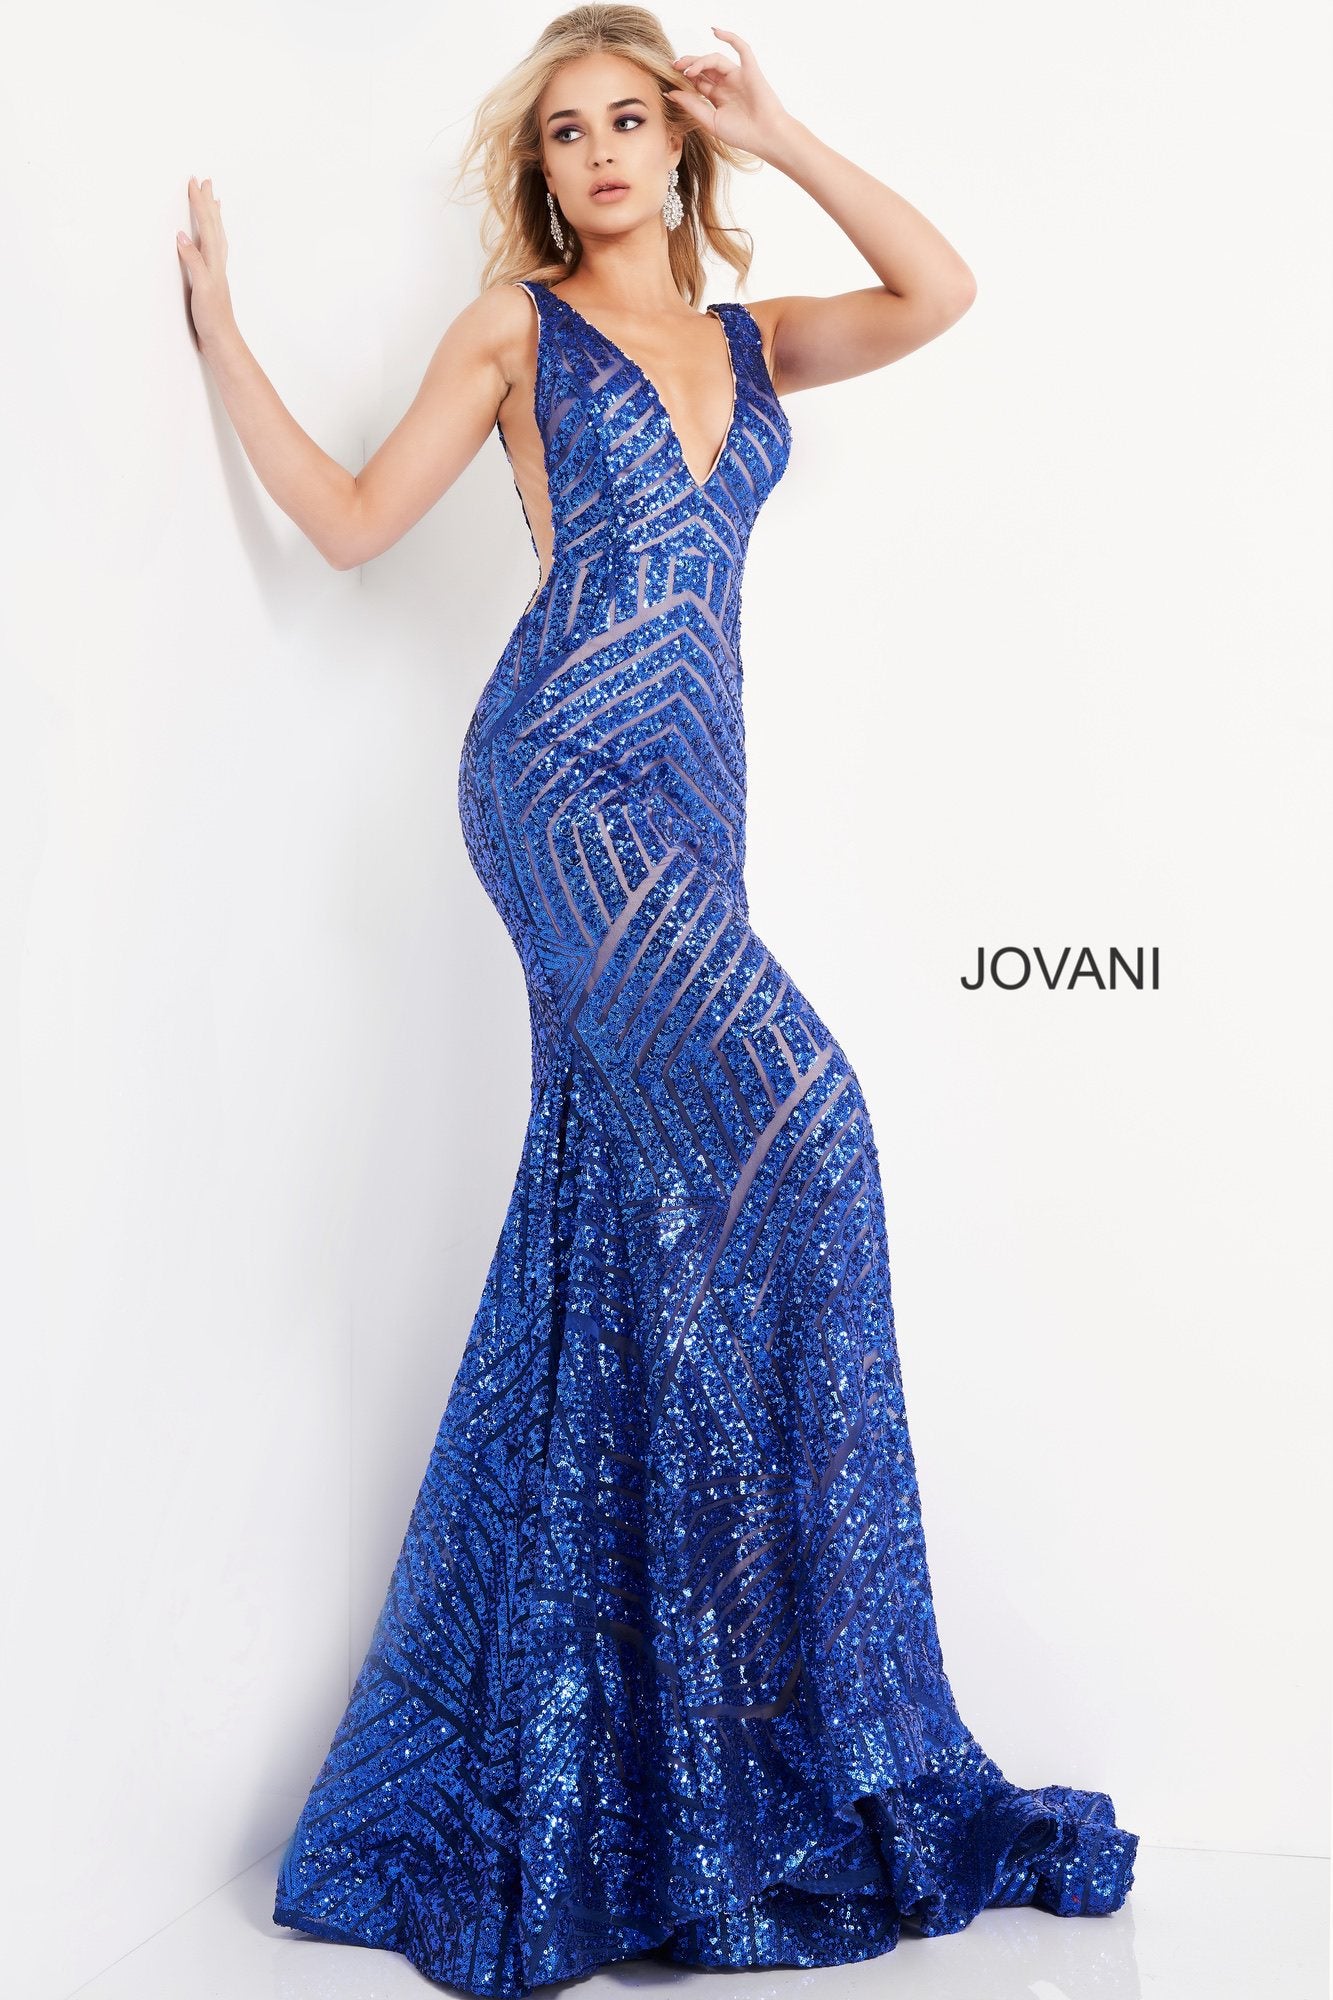    Jovani-59762-ROYAL-PROM-DRESS-FRONT-VIEW-PLUNGING-NECKLINE-MERMAID-LONG-TRAIN